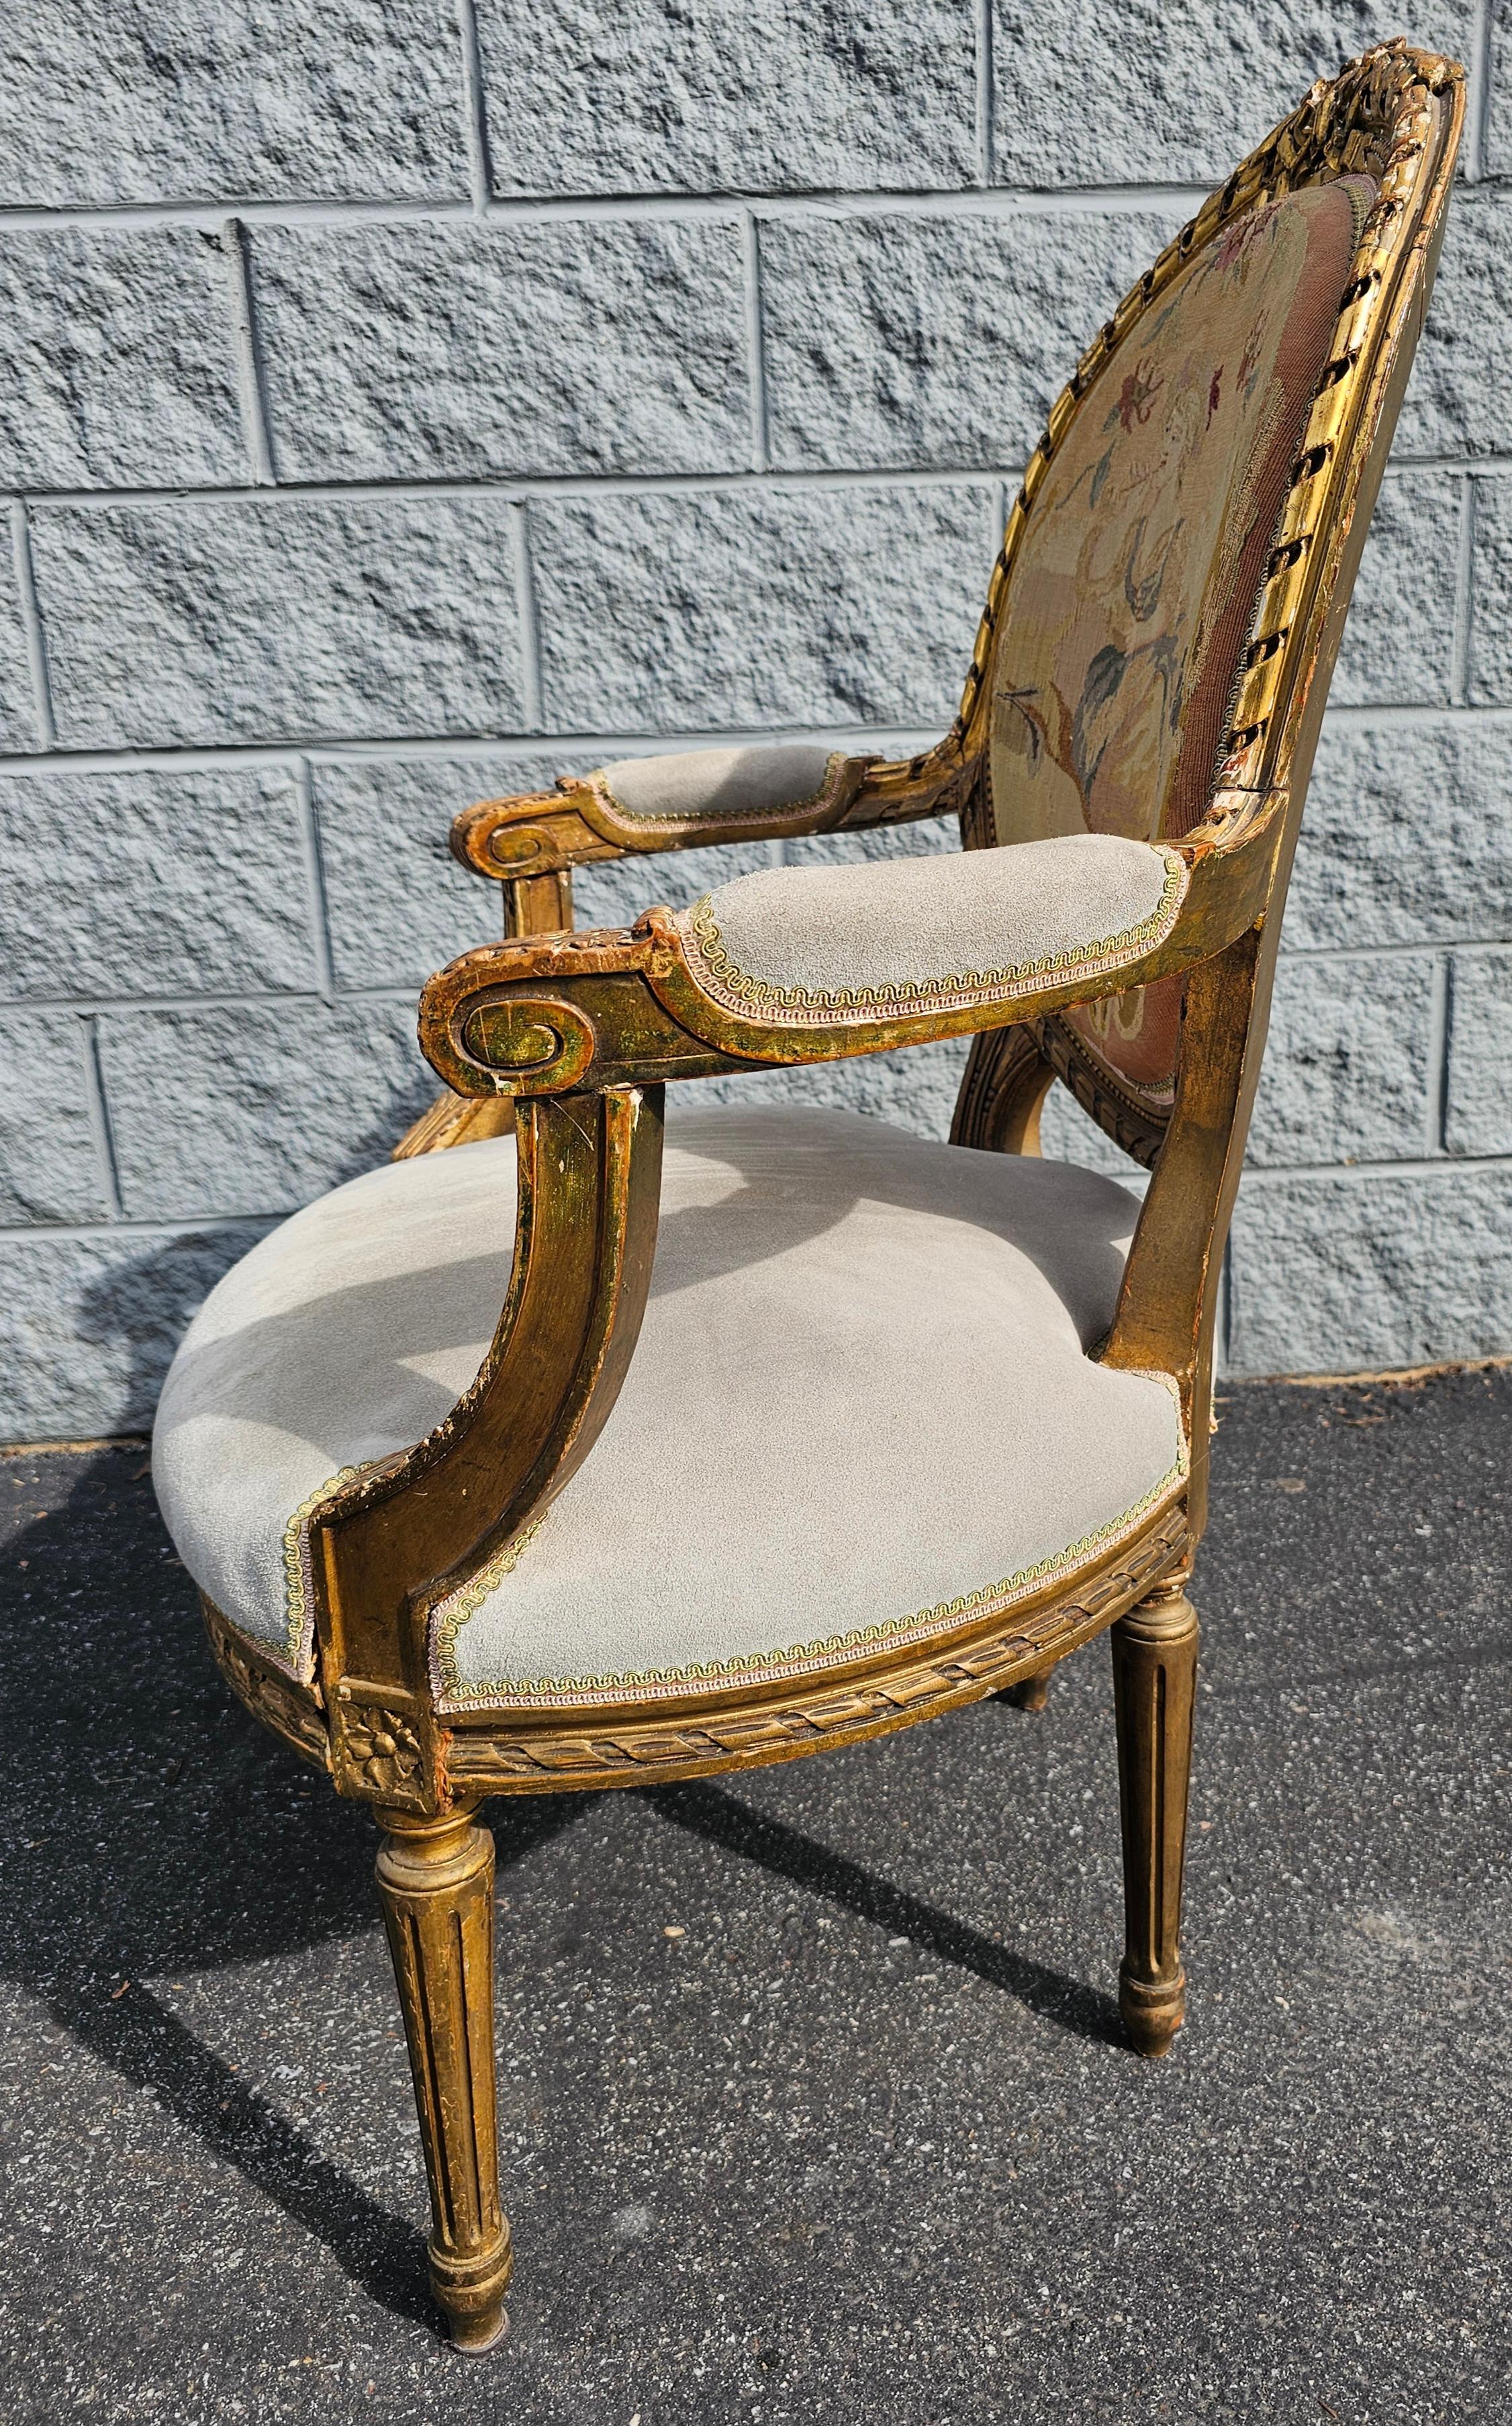 Louis XVI Style Gilt, Suede Leather and Needlepoint Upholstered Fauteuil For Sale 3